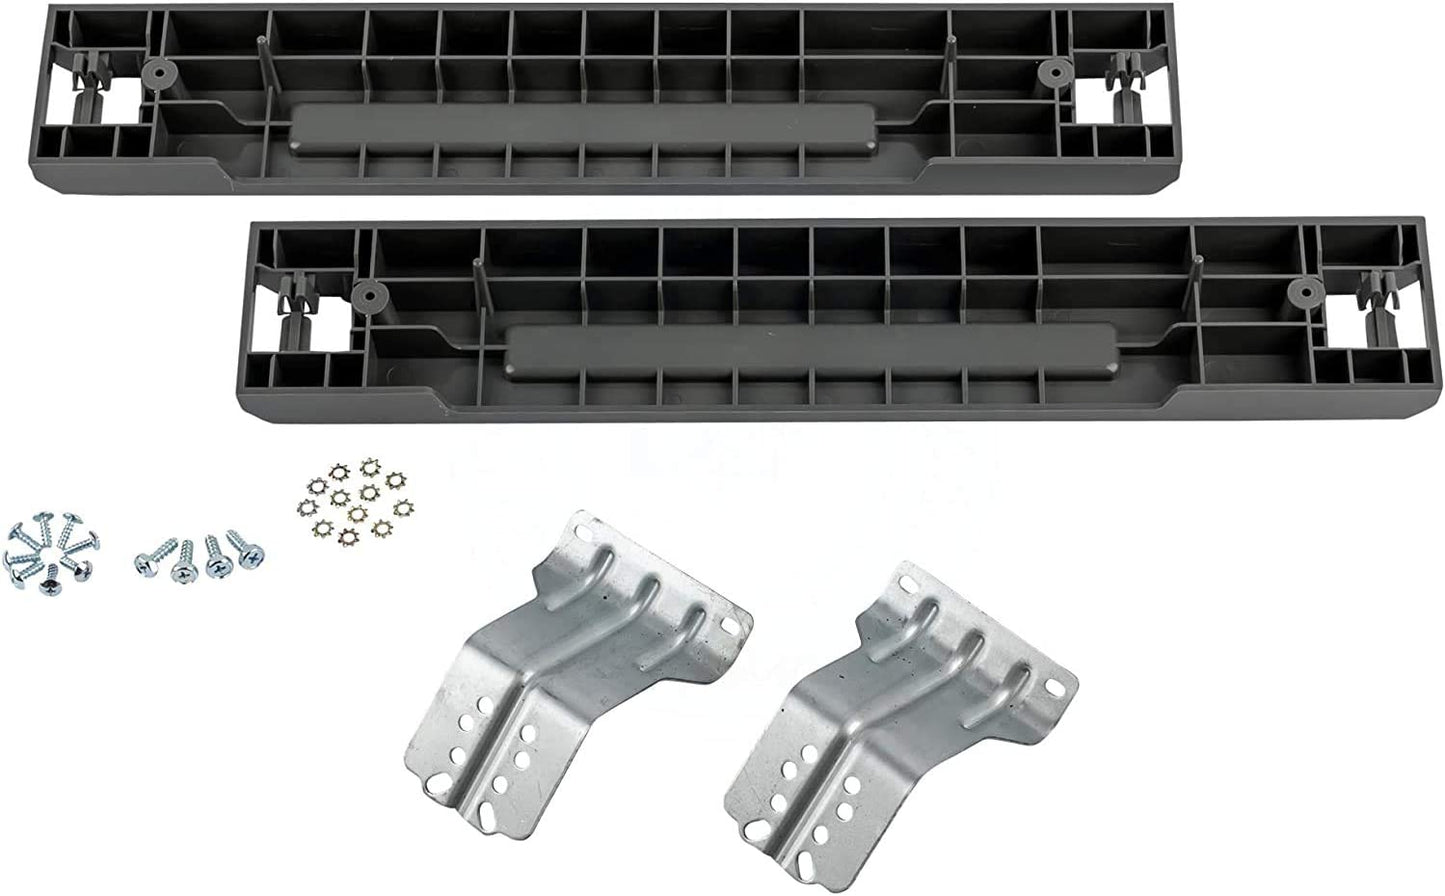 Lifetime Appliance Stacking Kit Compatible with Samsung Washer & Dryer - 27" Front Load Laundry SKK-7A, SK-5A, SK-5AXAA